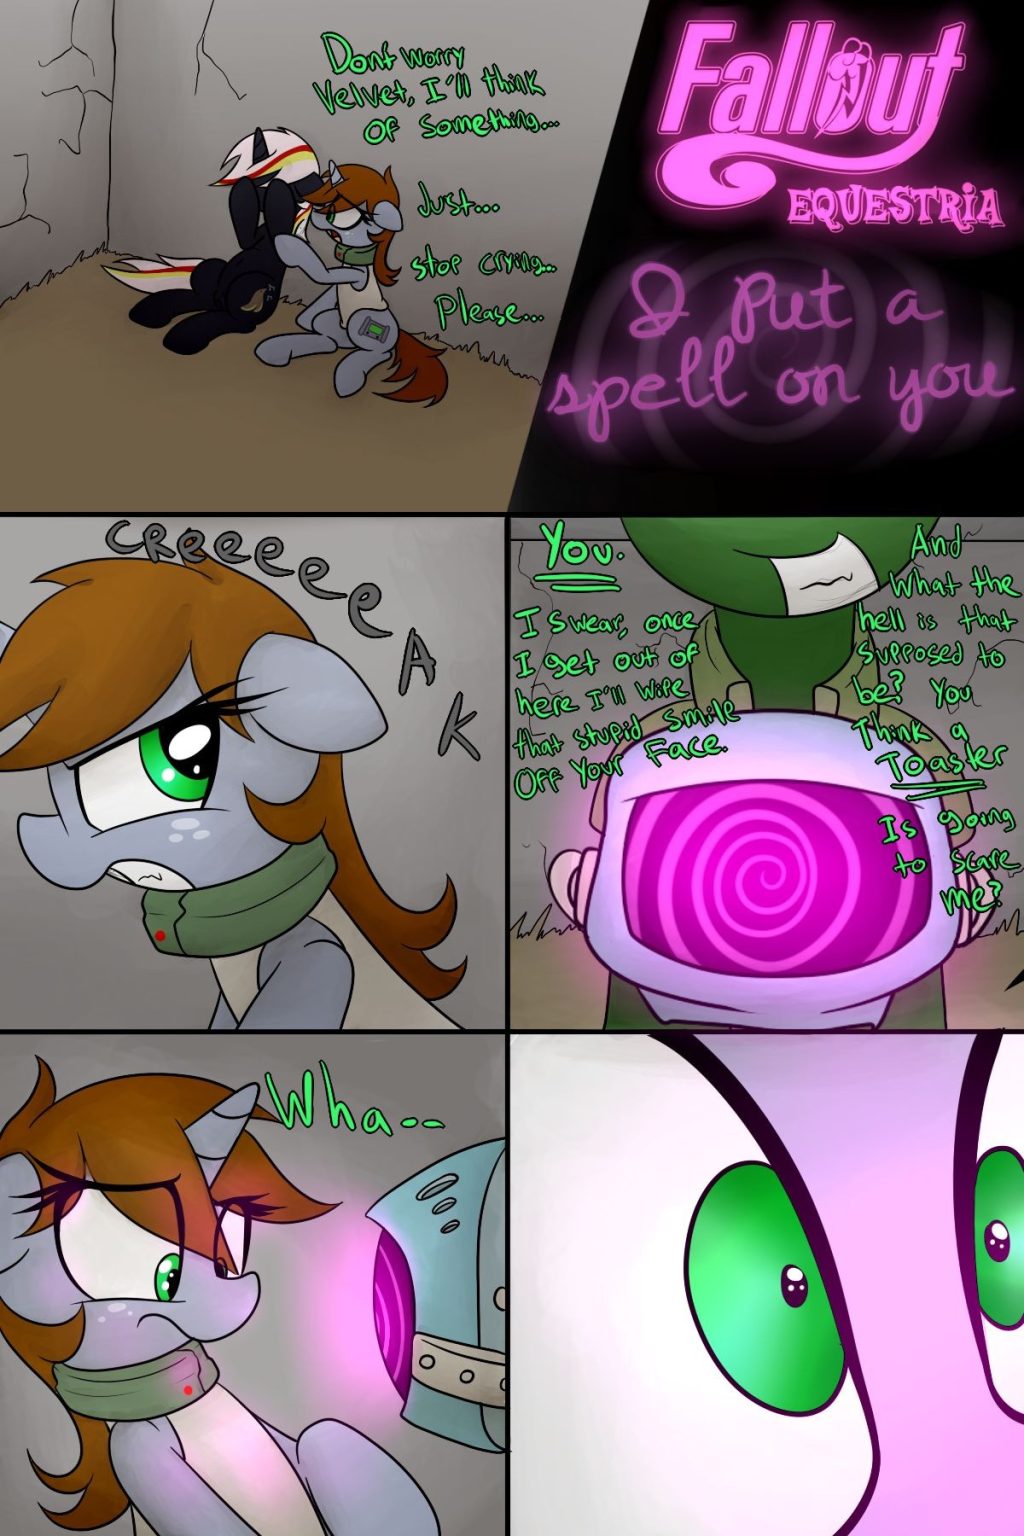 Fallout Equestria - I Put a Spell on You porn comic picture 1